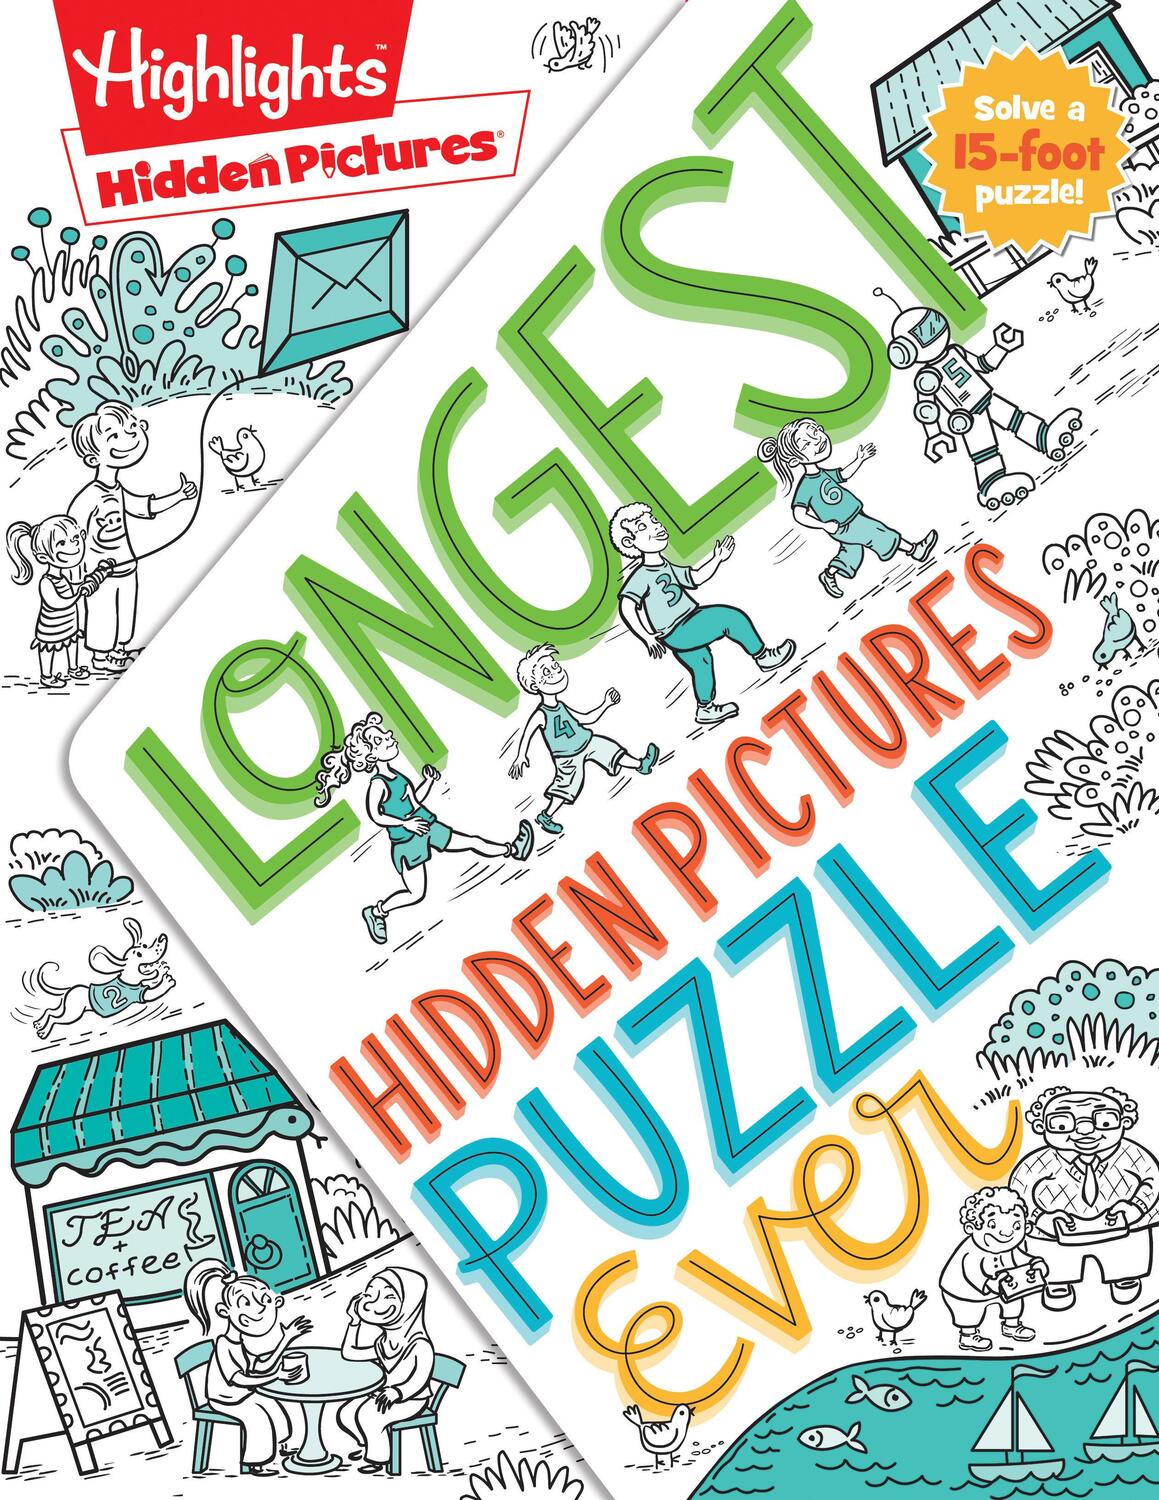 Cover: 9781684376483 | Longest Hidden Pictures Puzzle Ever | HIGHLIGHTS | Taschenbuch | 2019